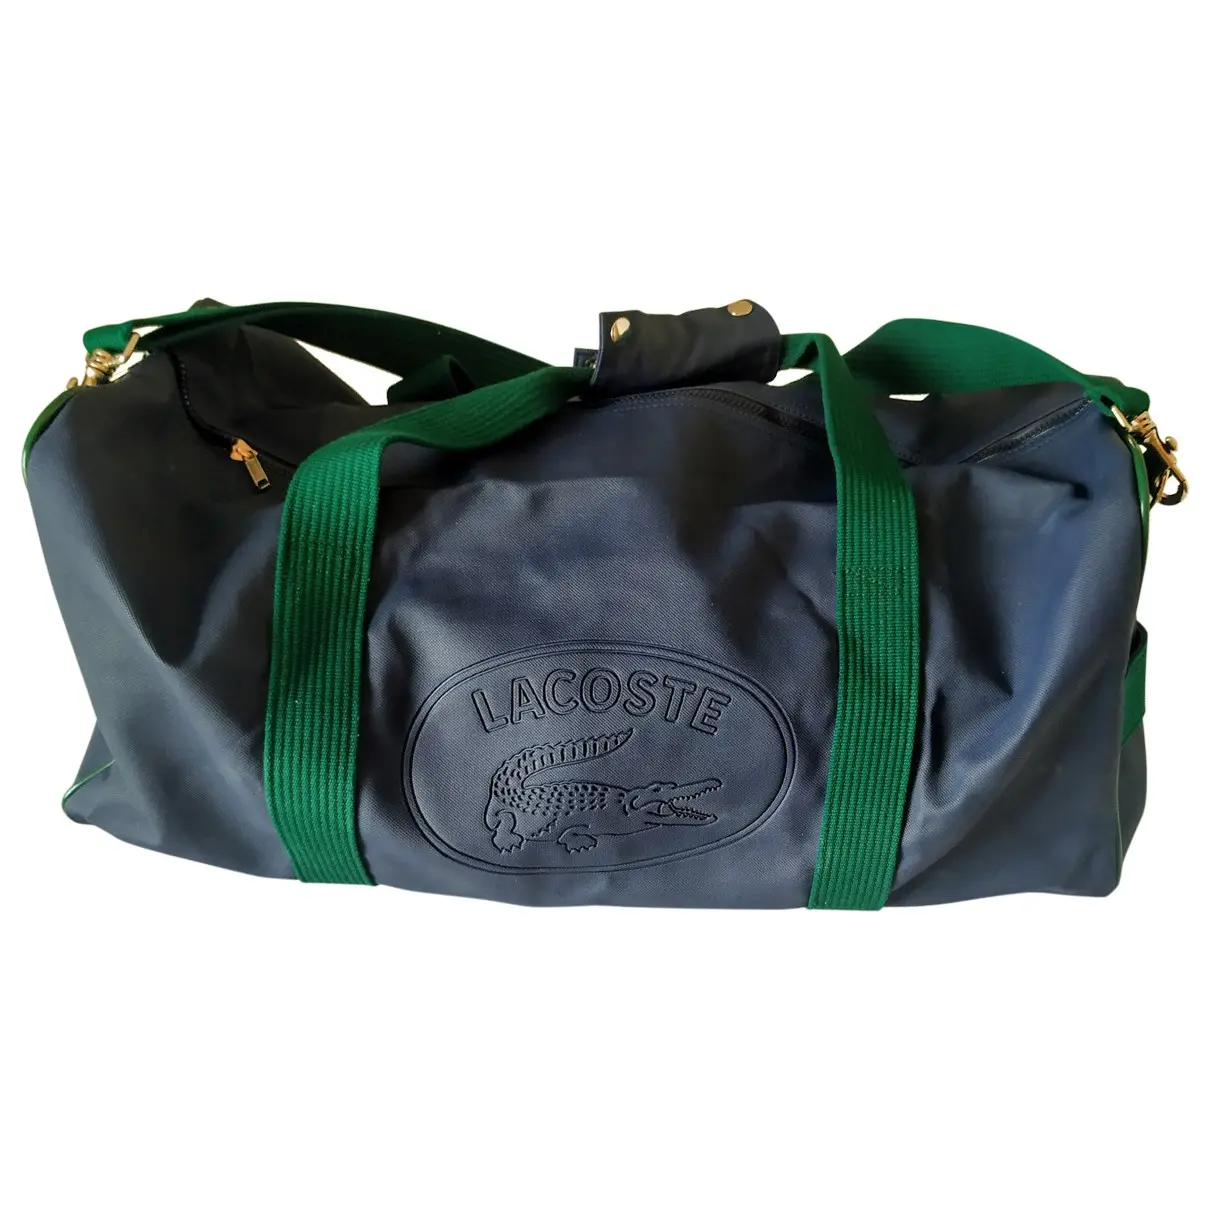 Cloth weekend bag Lacoste